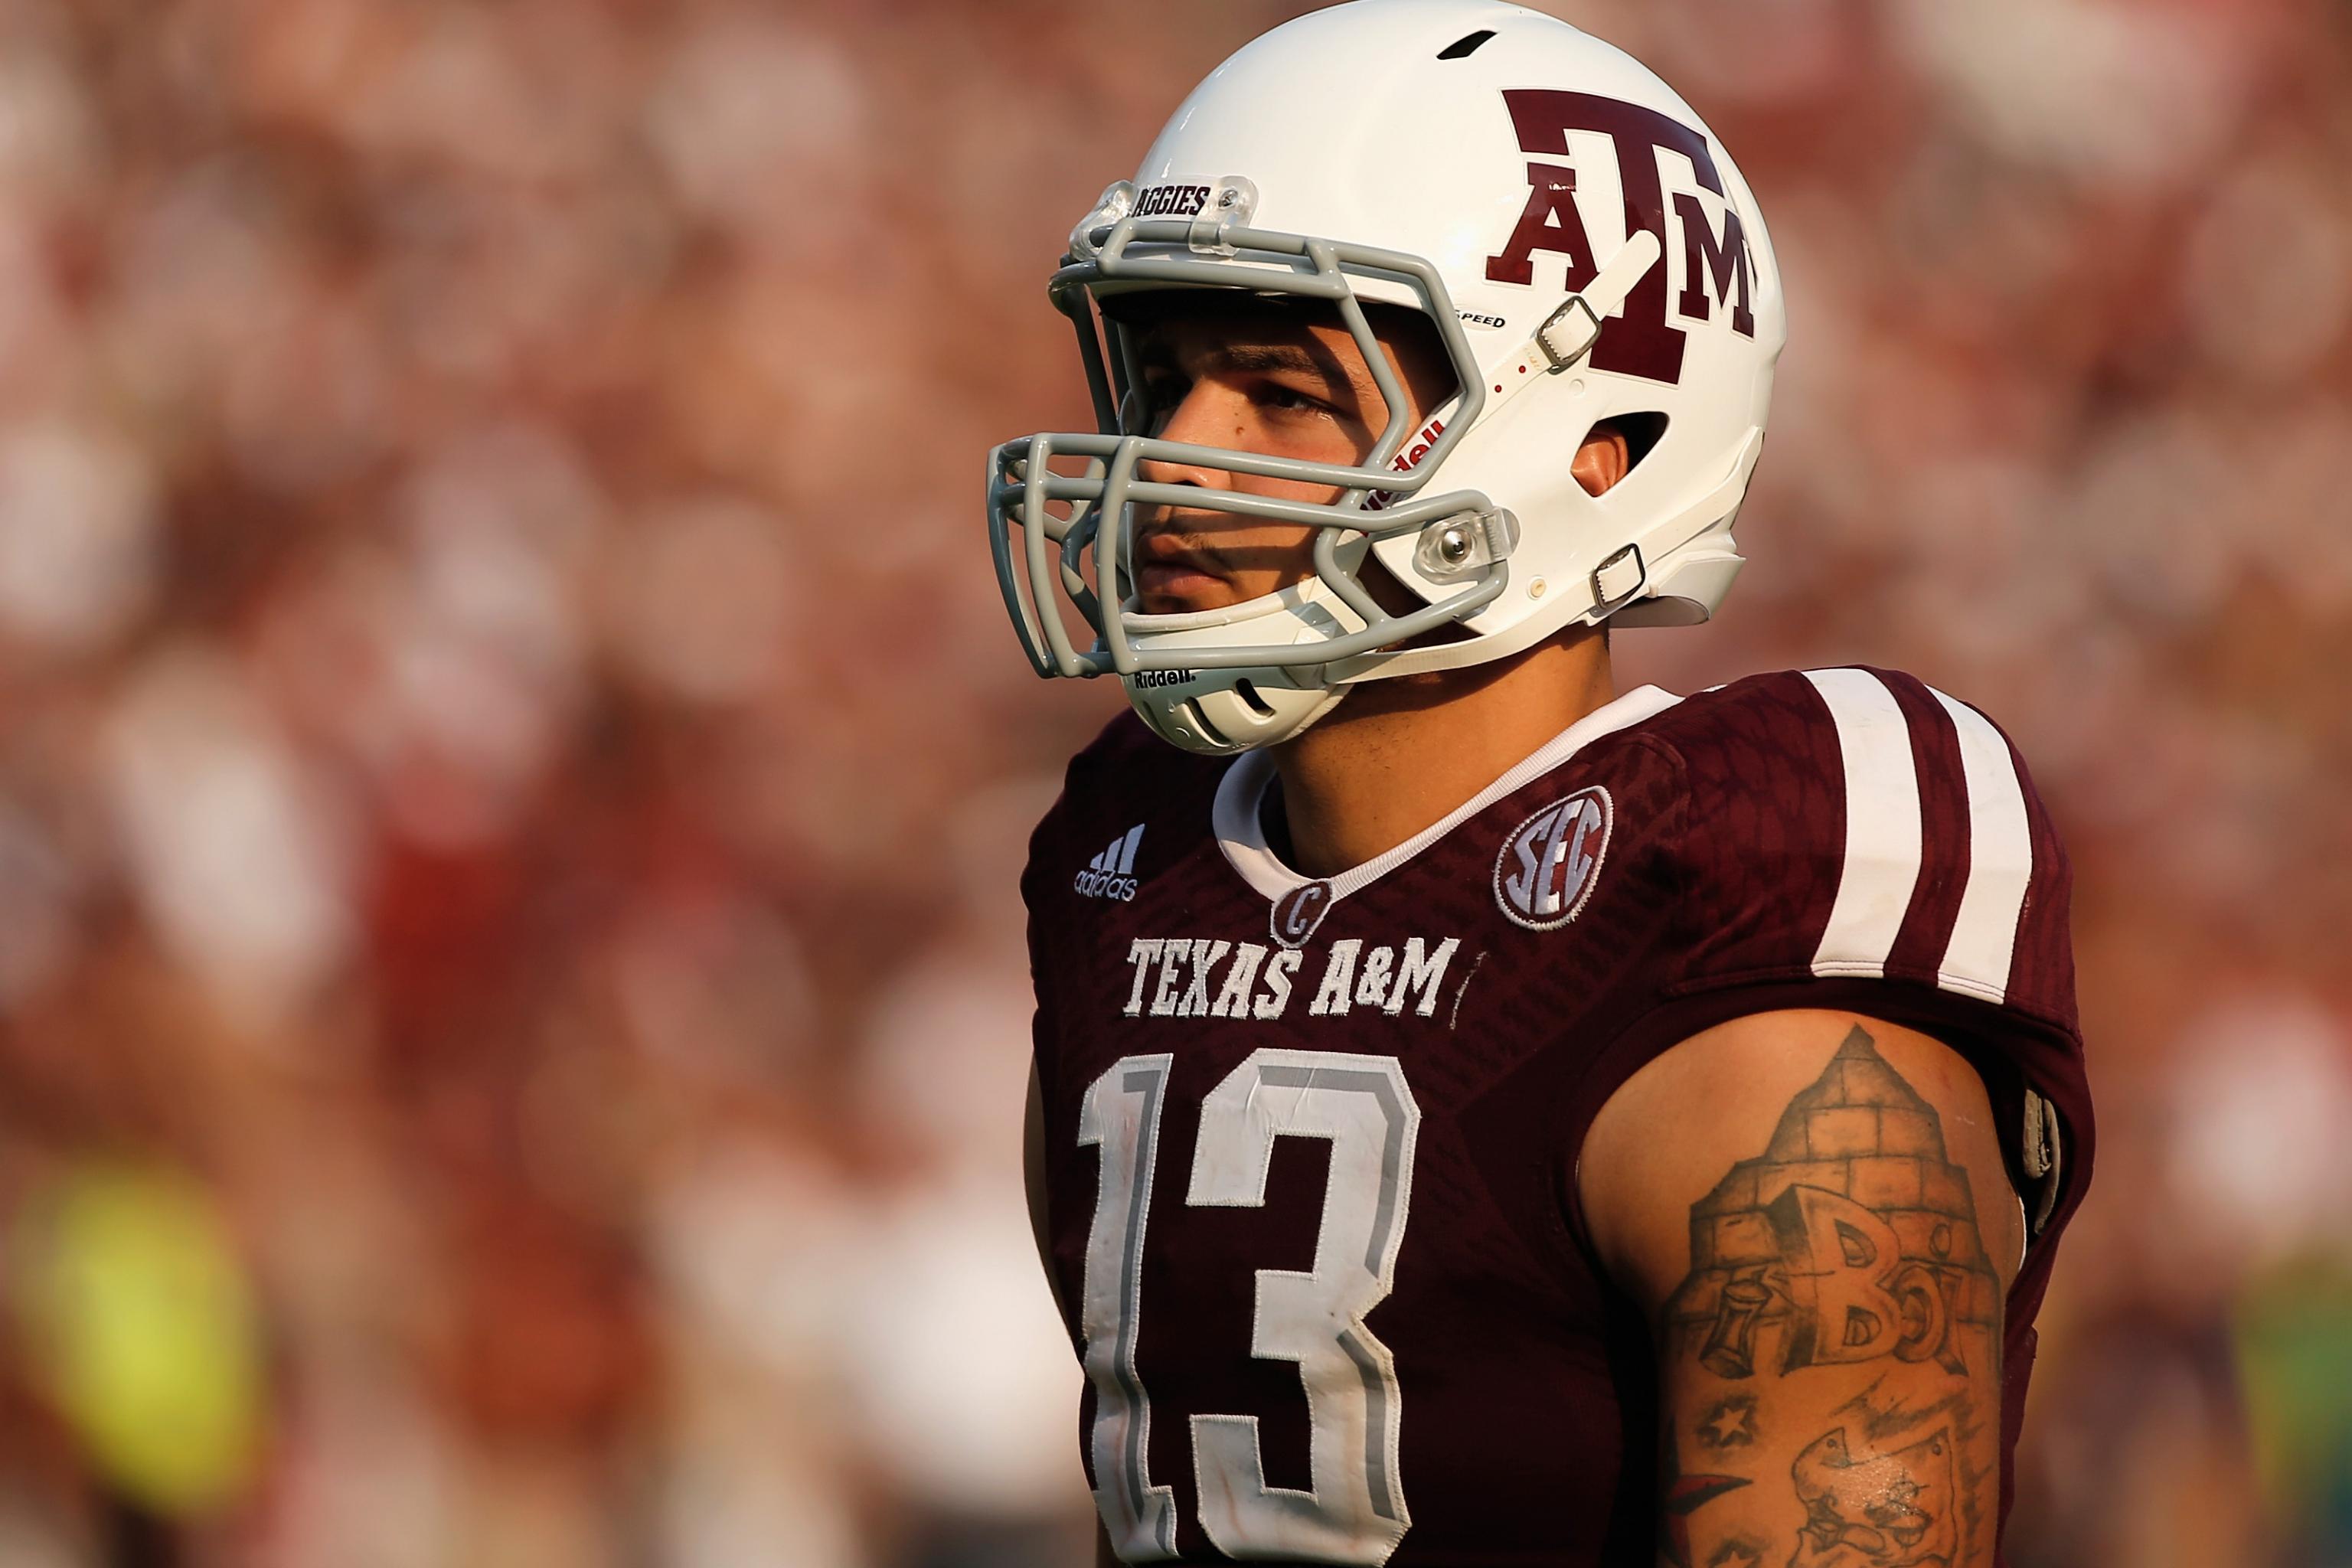 mike evans a&m jersey